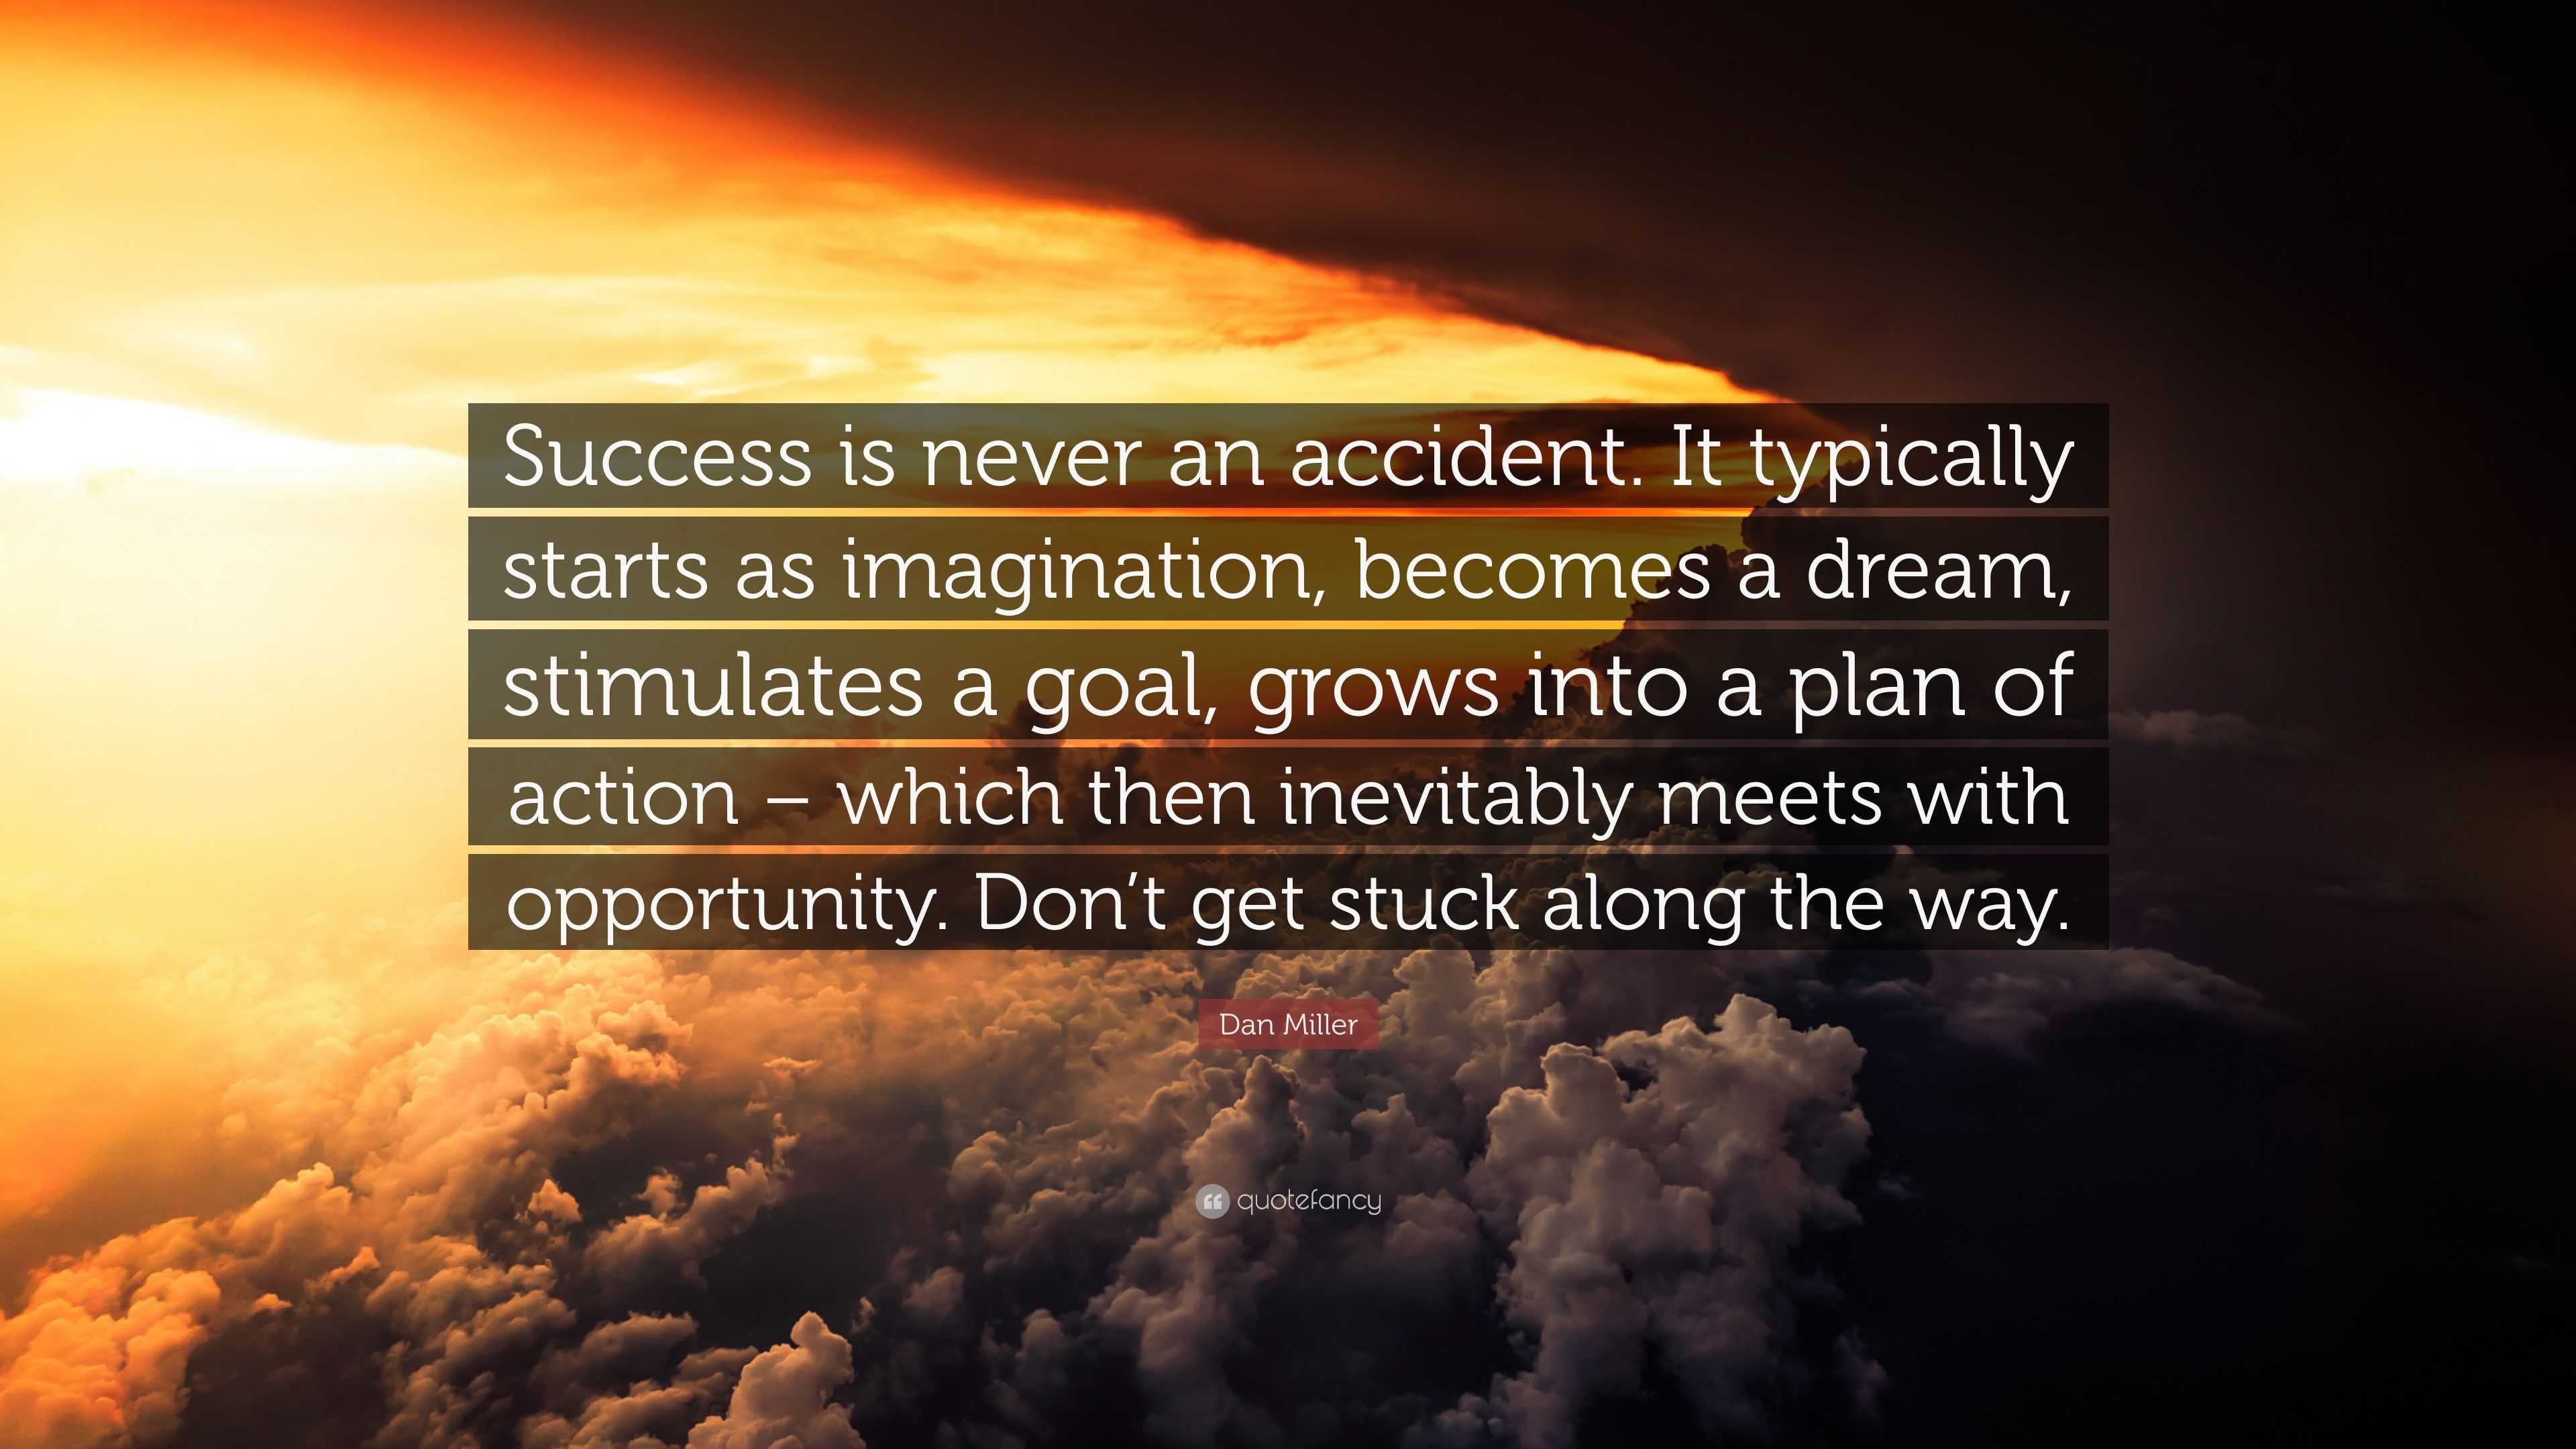 Dan Miller Quote: “Success Is Never An Accident. It Typically Starts As Imagination, Becomes A Dream, Stimulates A Goal, Grows Into A Plan ...”